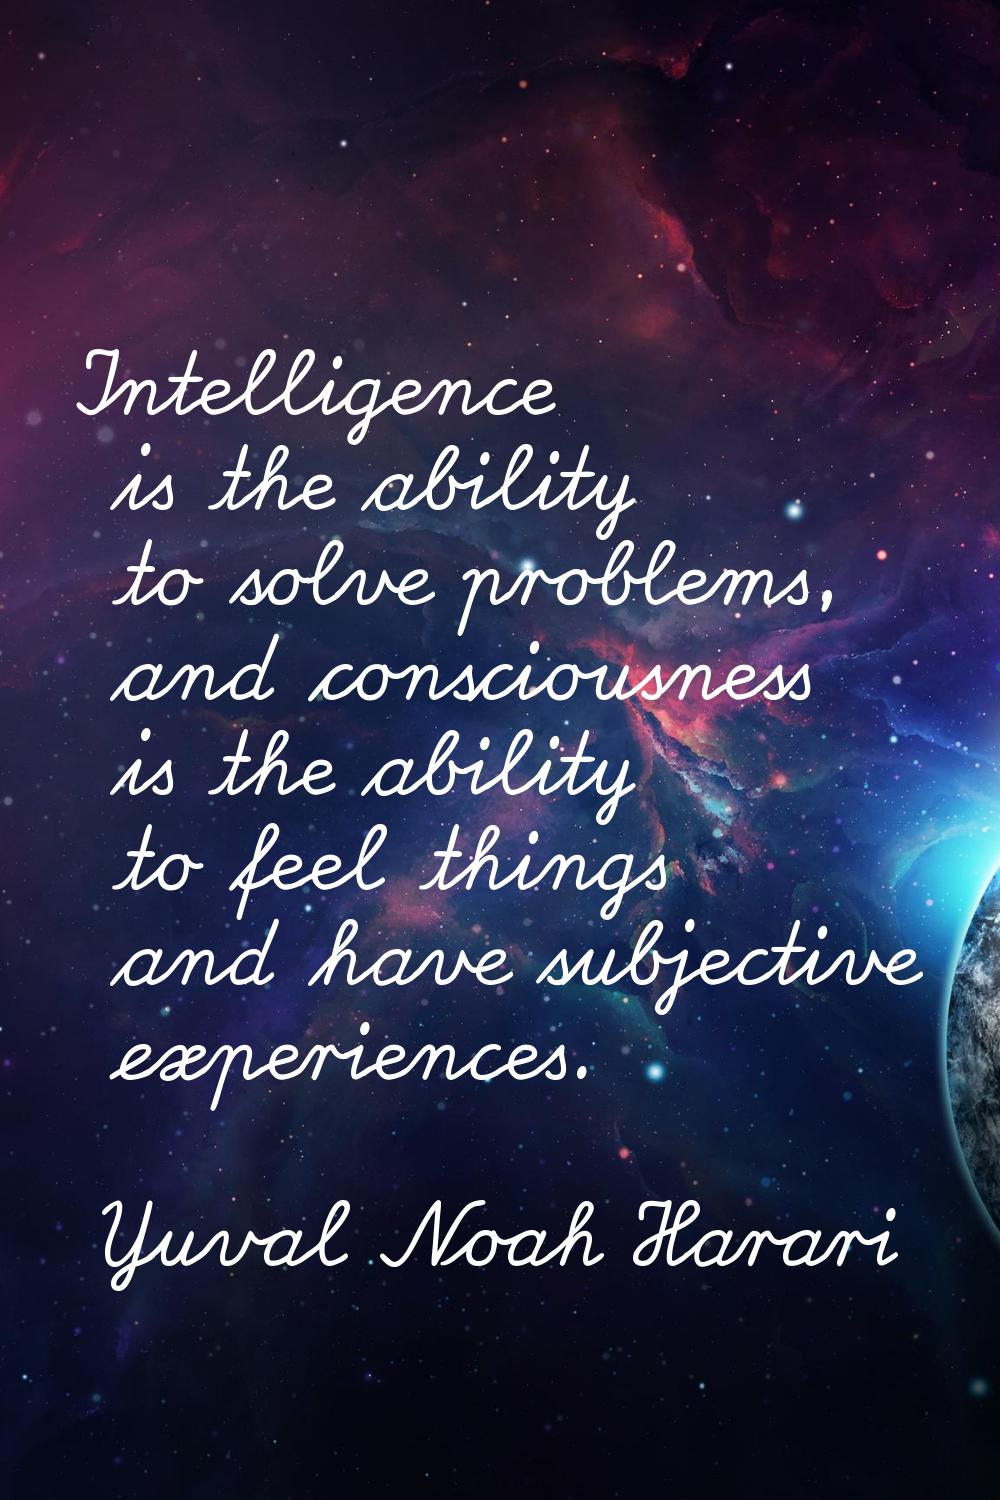 Intelligence is the ability to solve problems, and consciousness is the ability to feel things and 